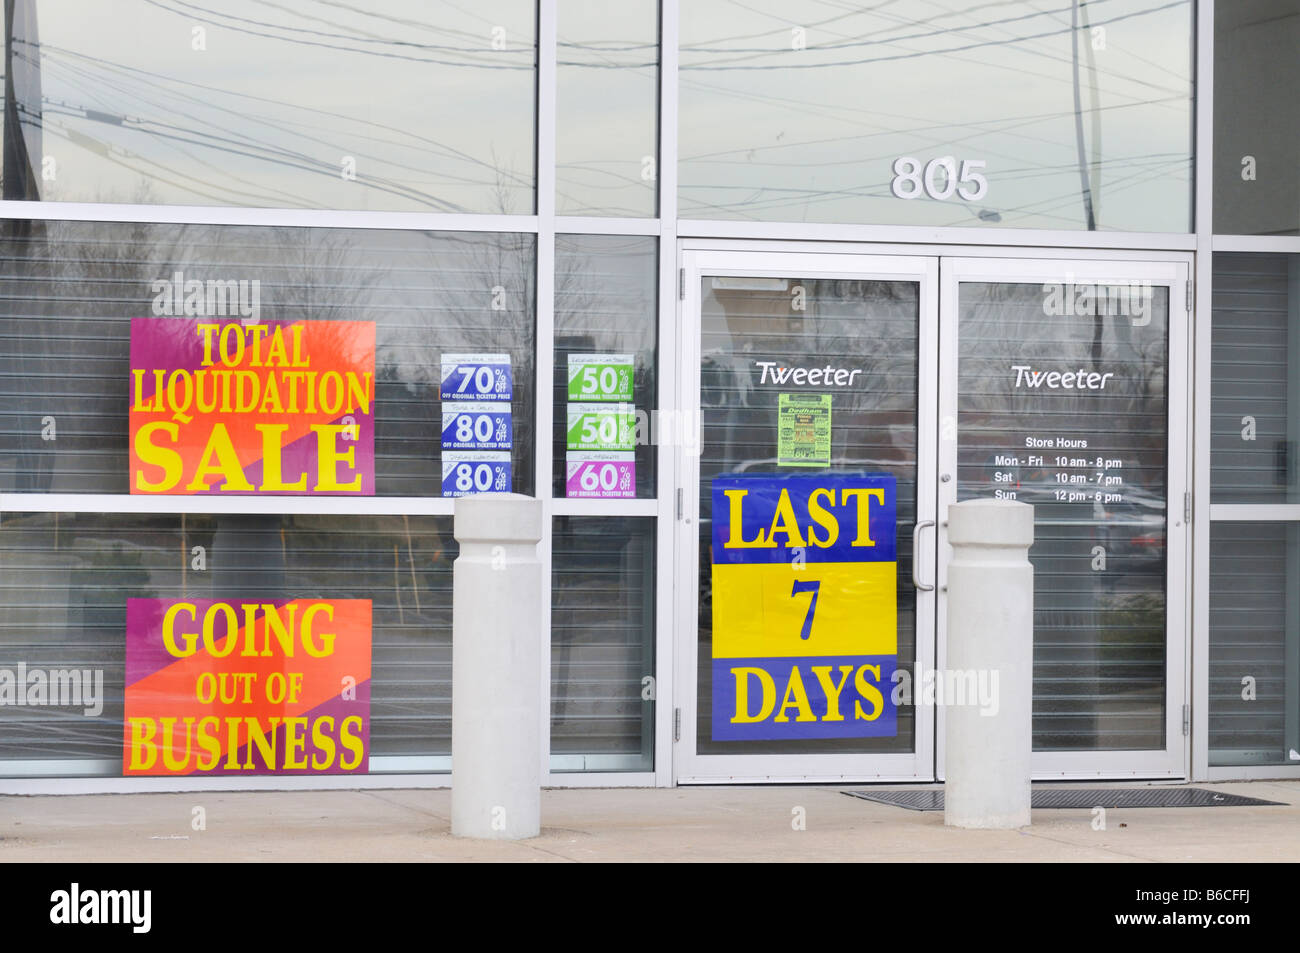 Empty  closed retail store with liquidation sale signs in windows. Stock Photo